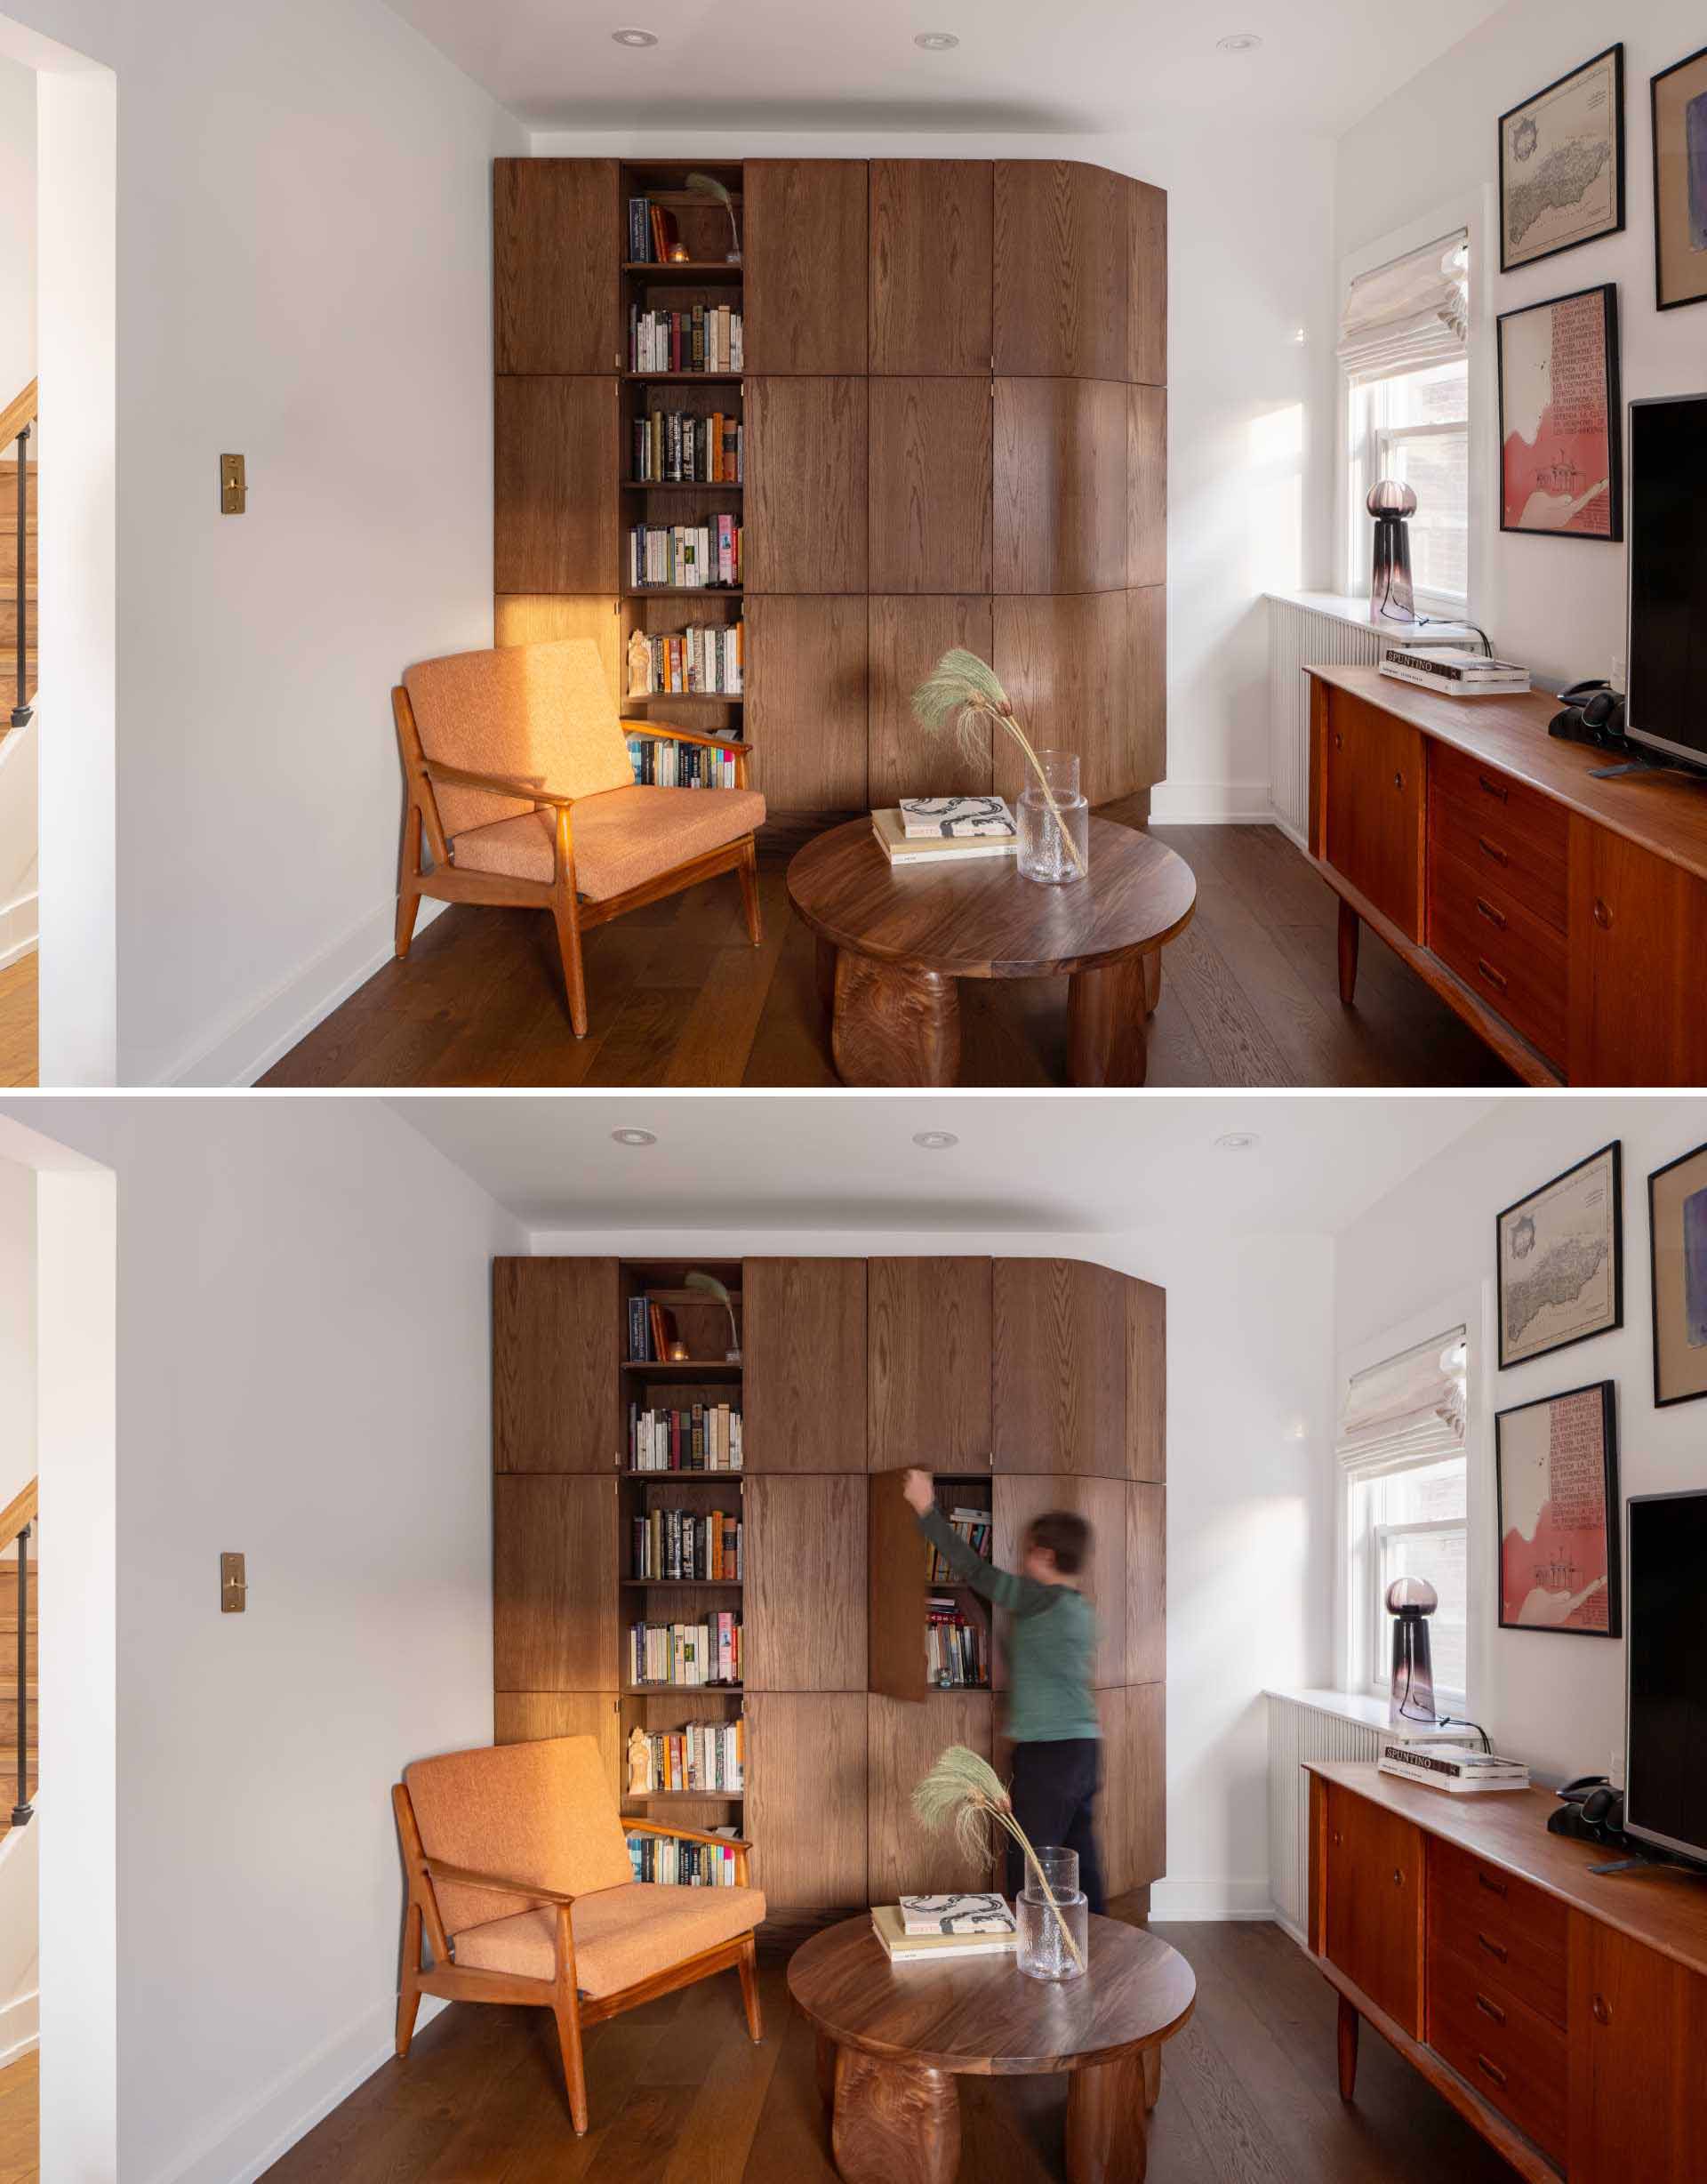 A curved wood cabinet and bookshelf allows the light from the window to ،ne through to the interior.